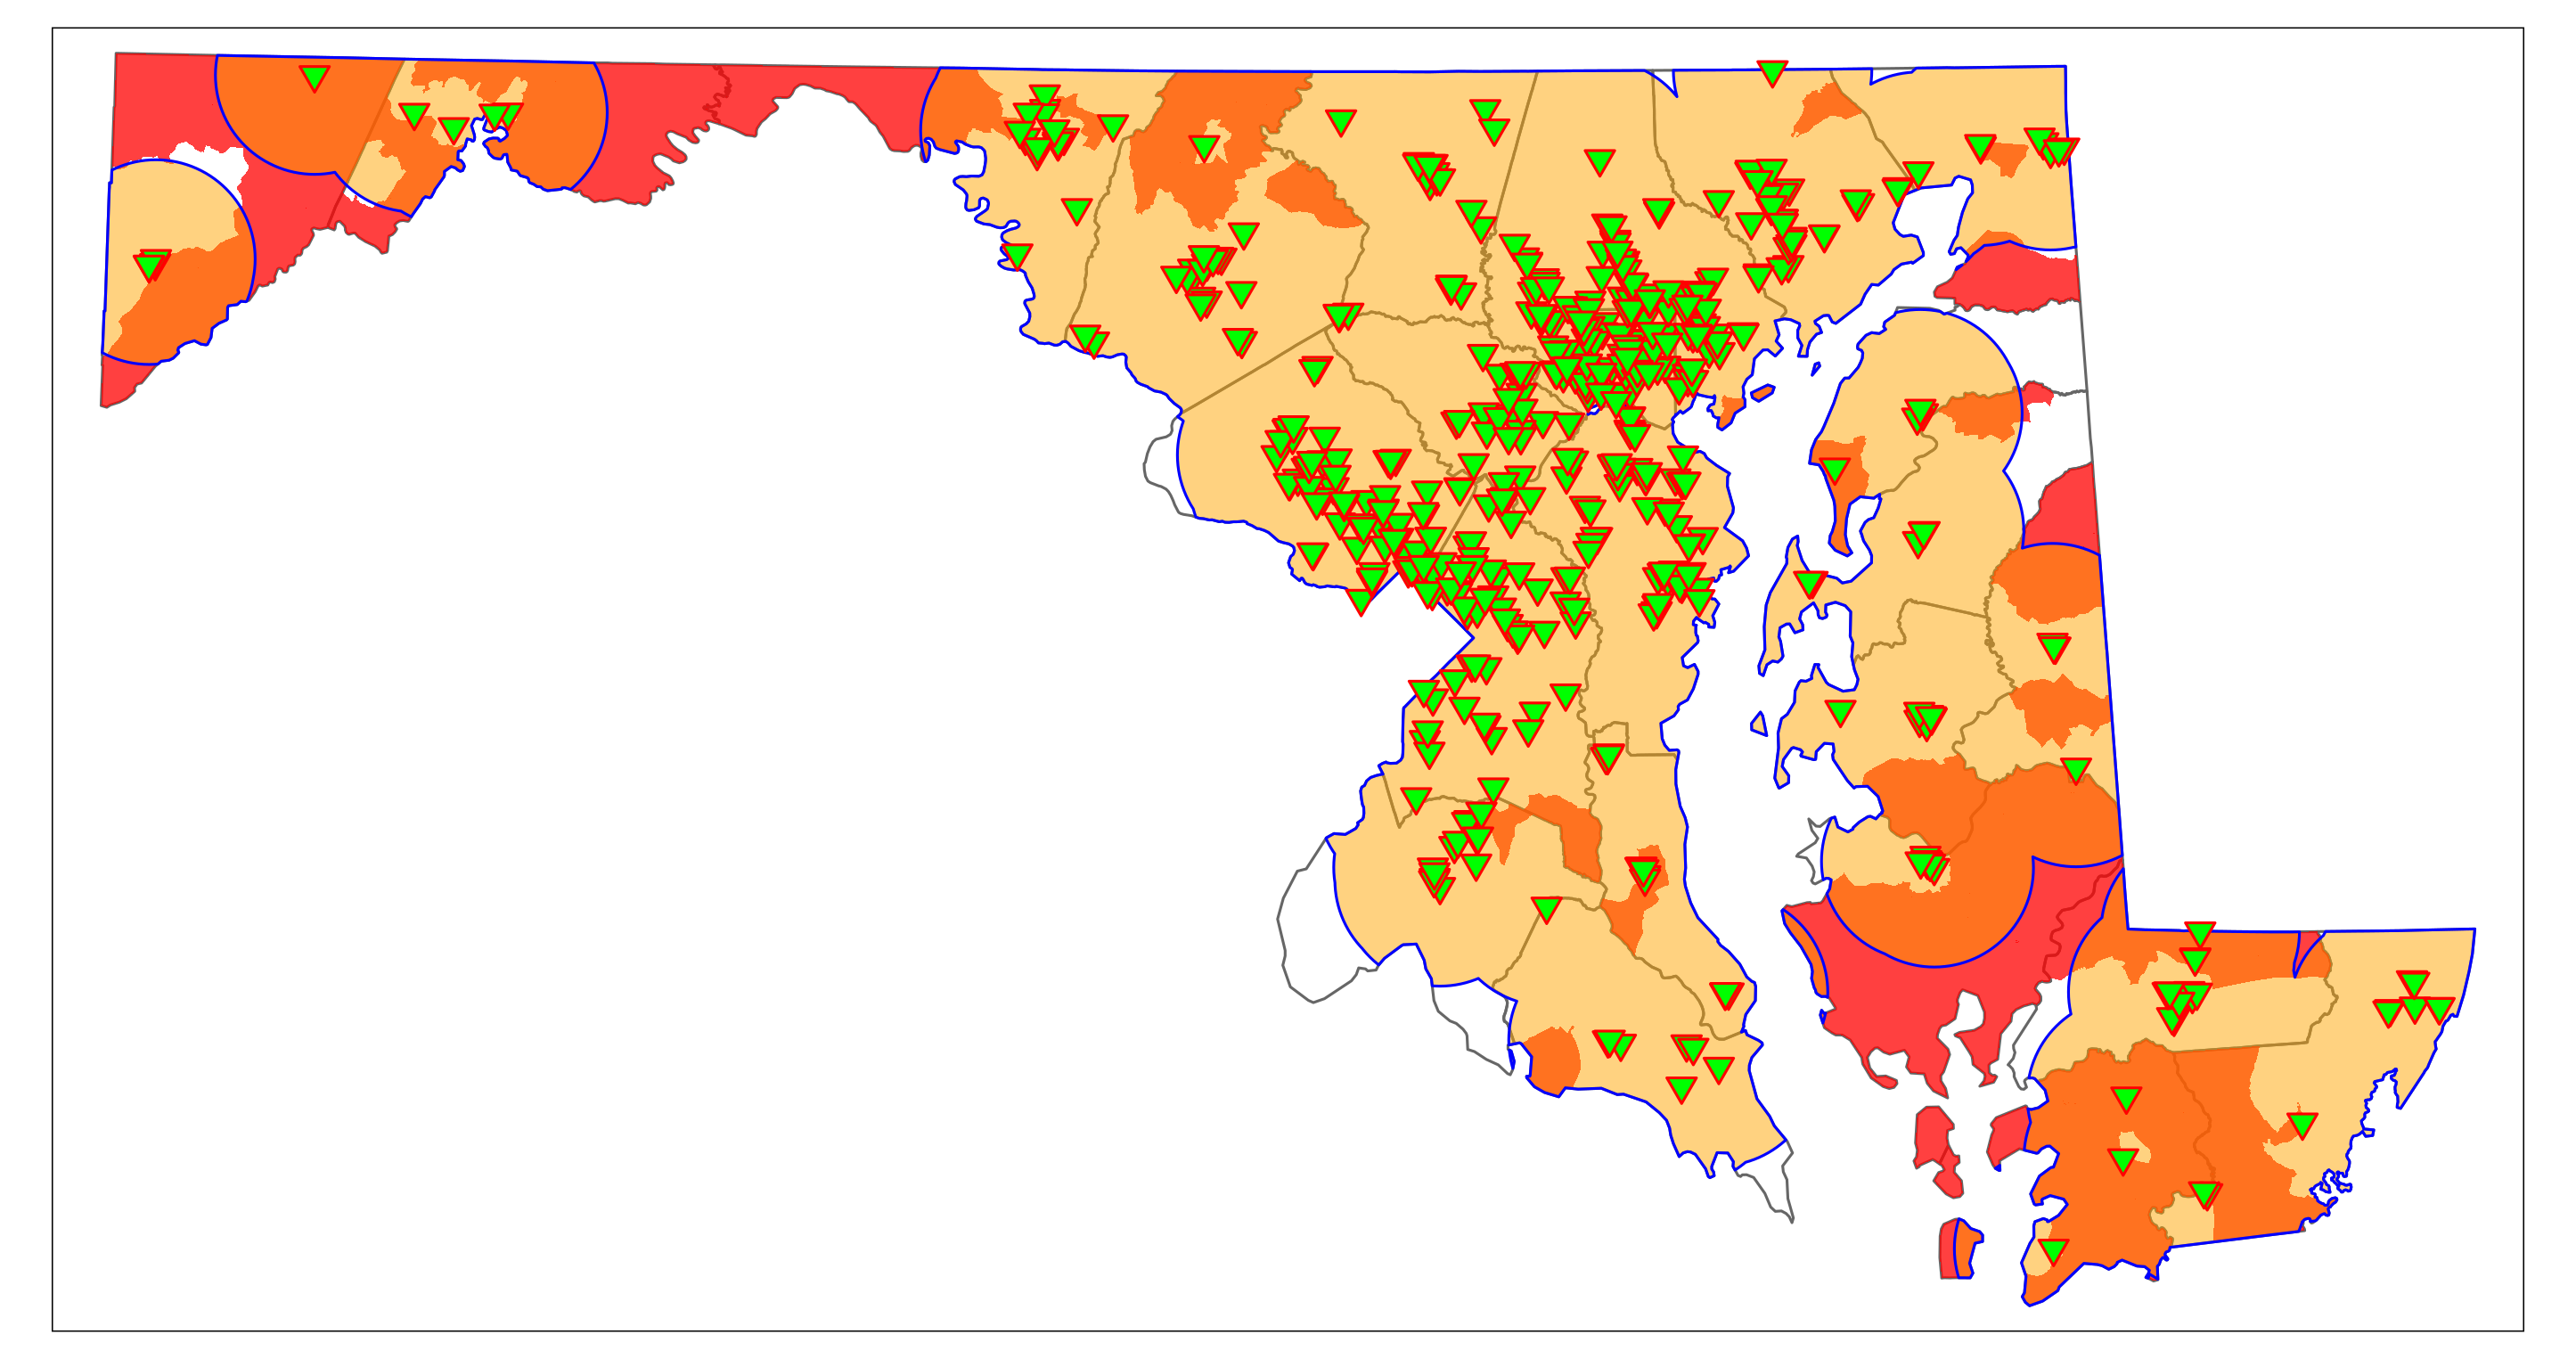 A map of Maryland showing rural areas and vaccination sites